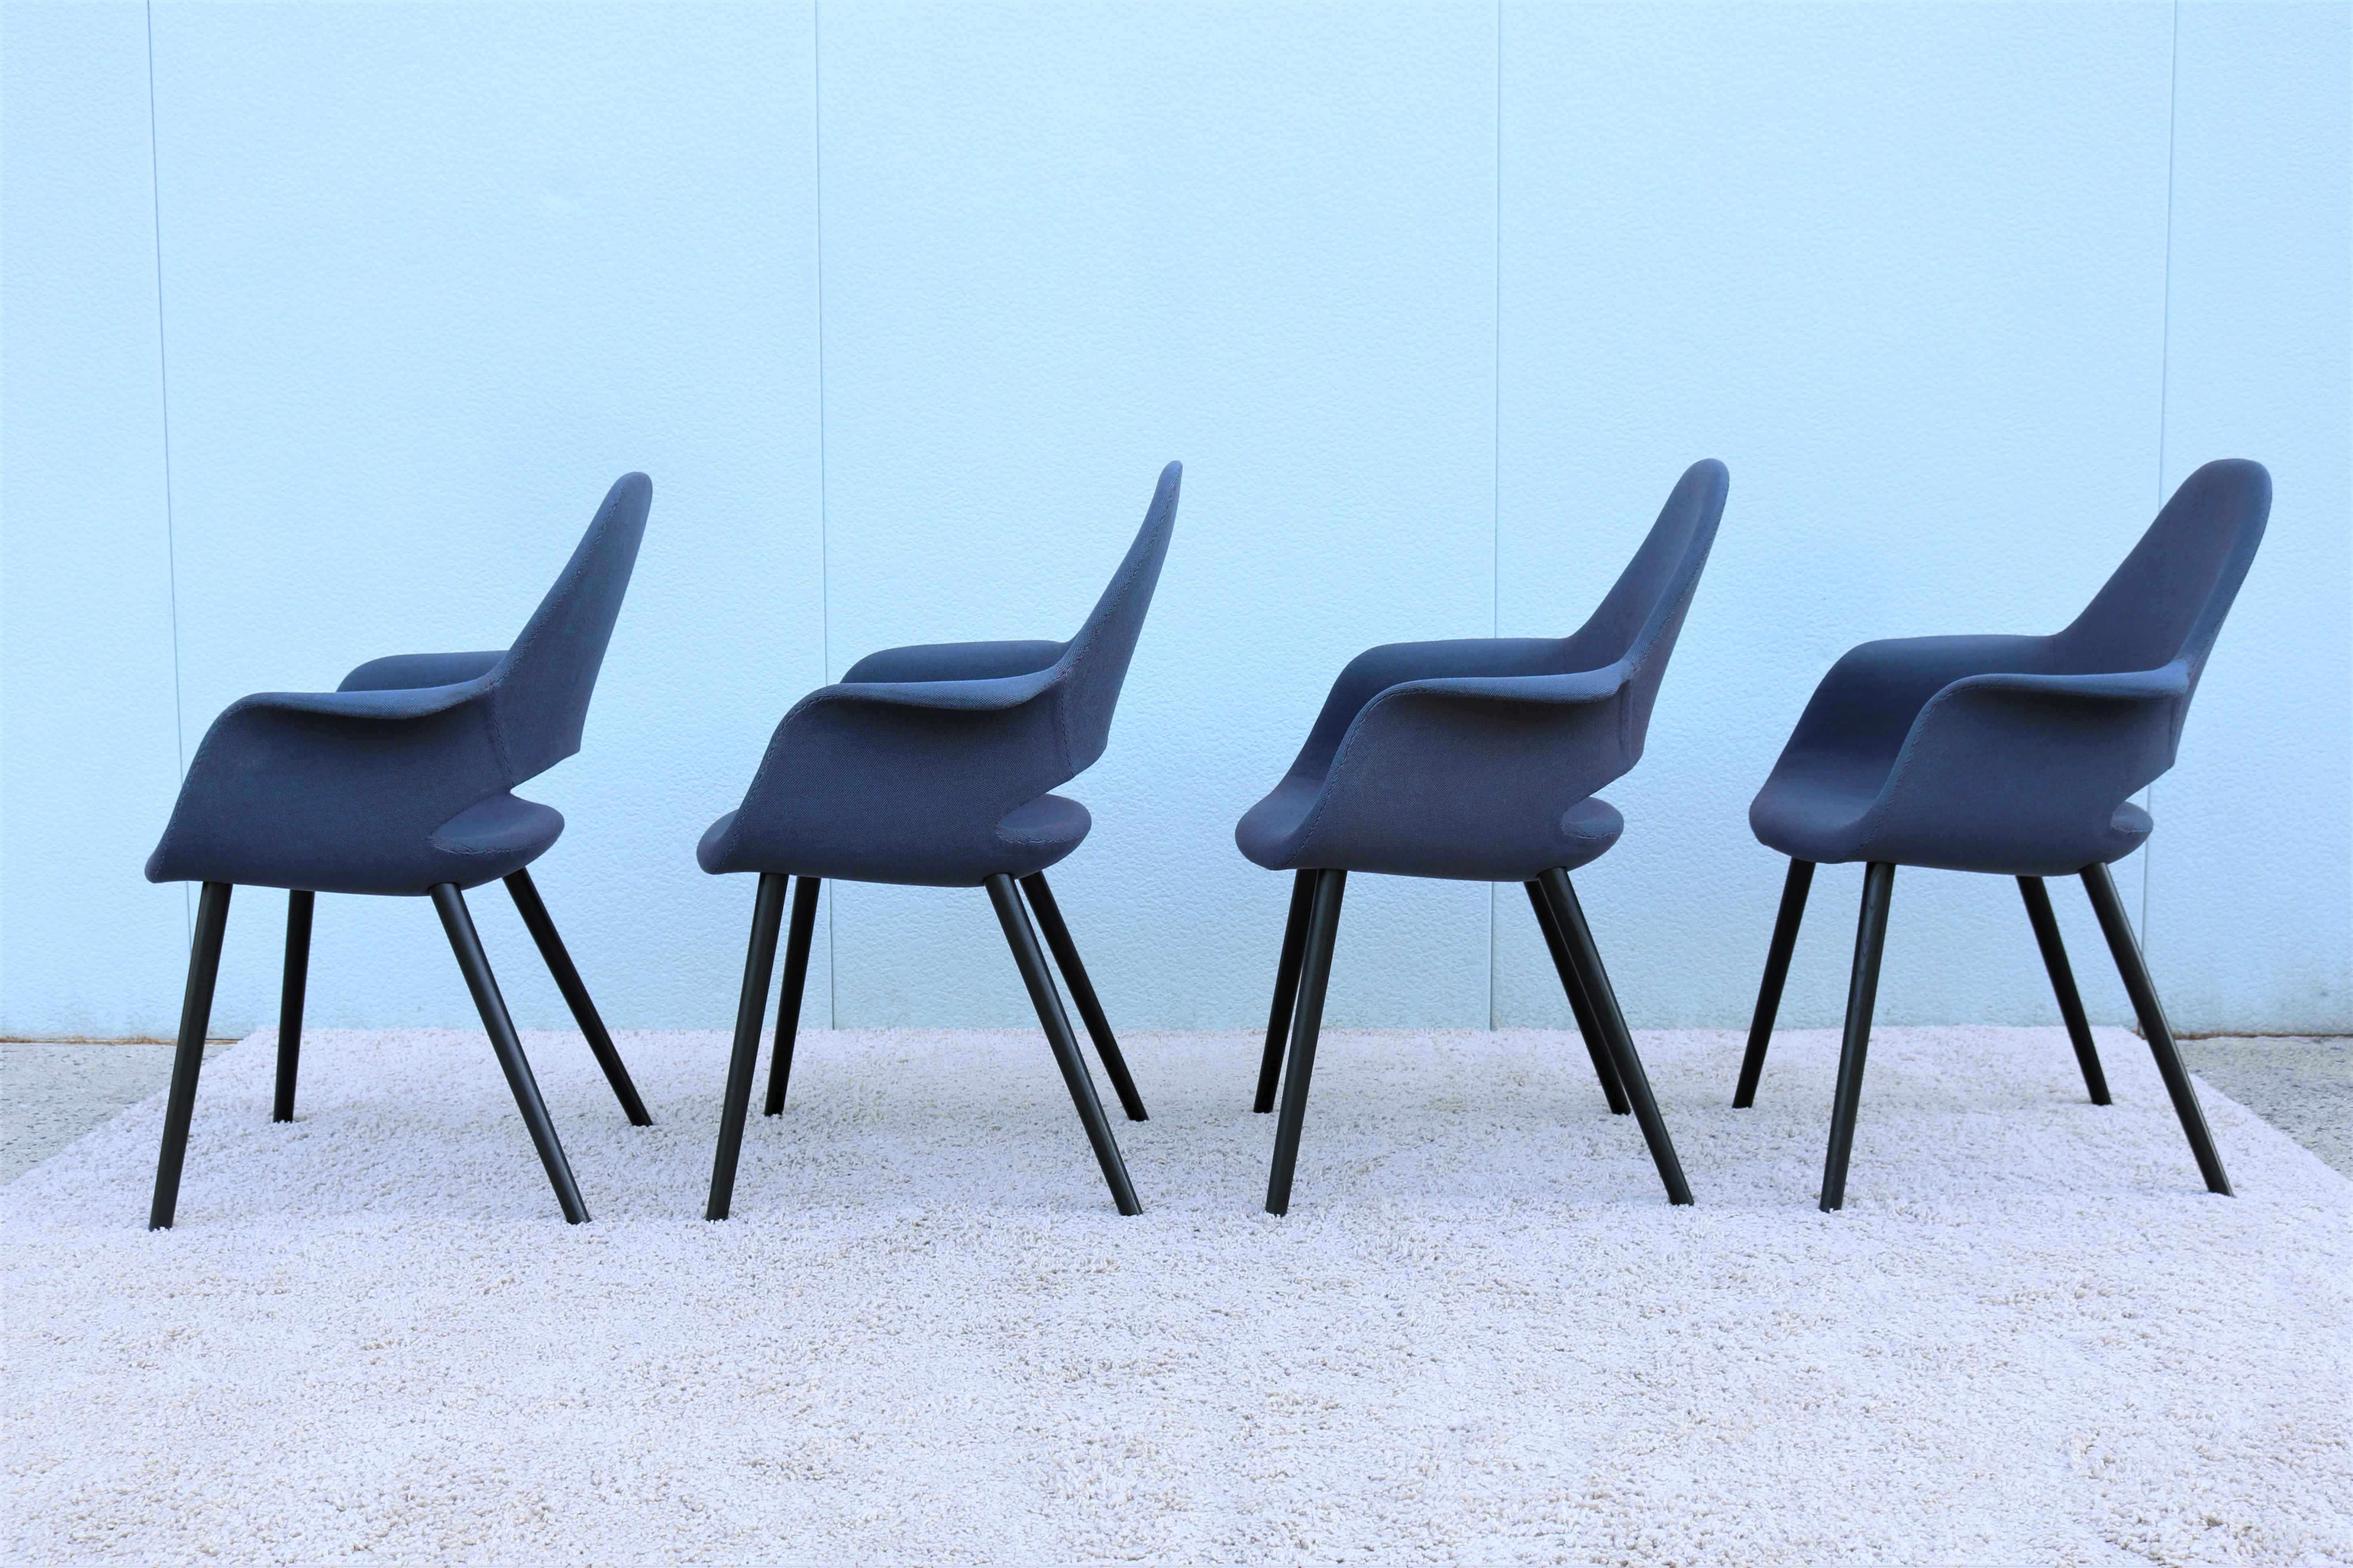 Charles Eames & Eero Saarinen for Vitra Organic Conference Chairs, Set of 4 In Good Condition For Sale In Secaucus, NJ